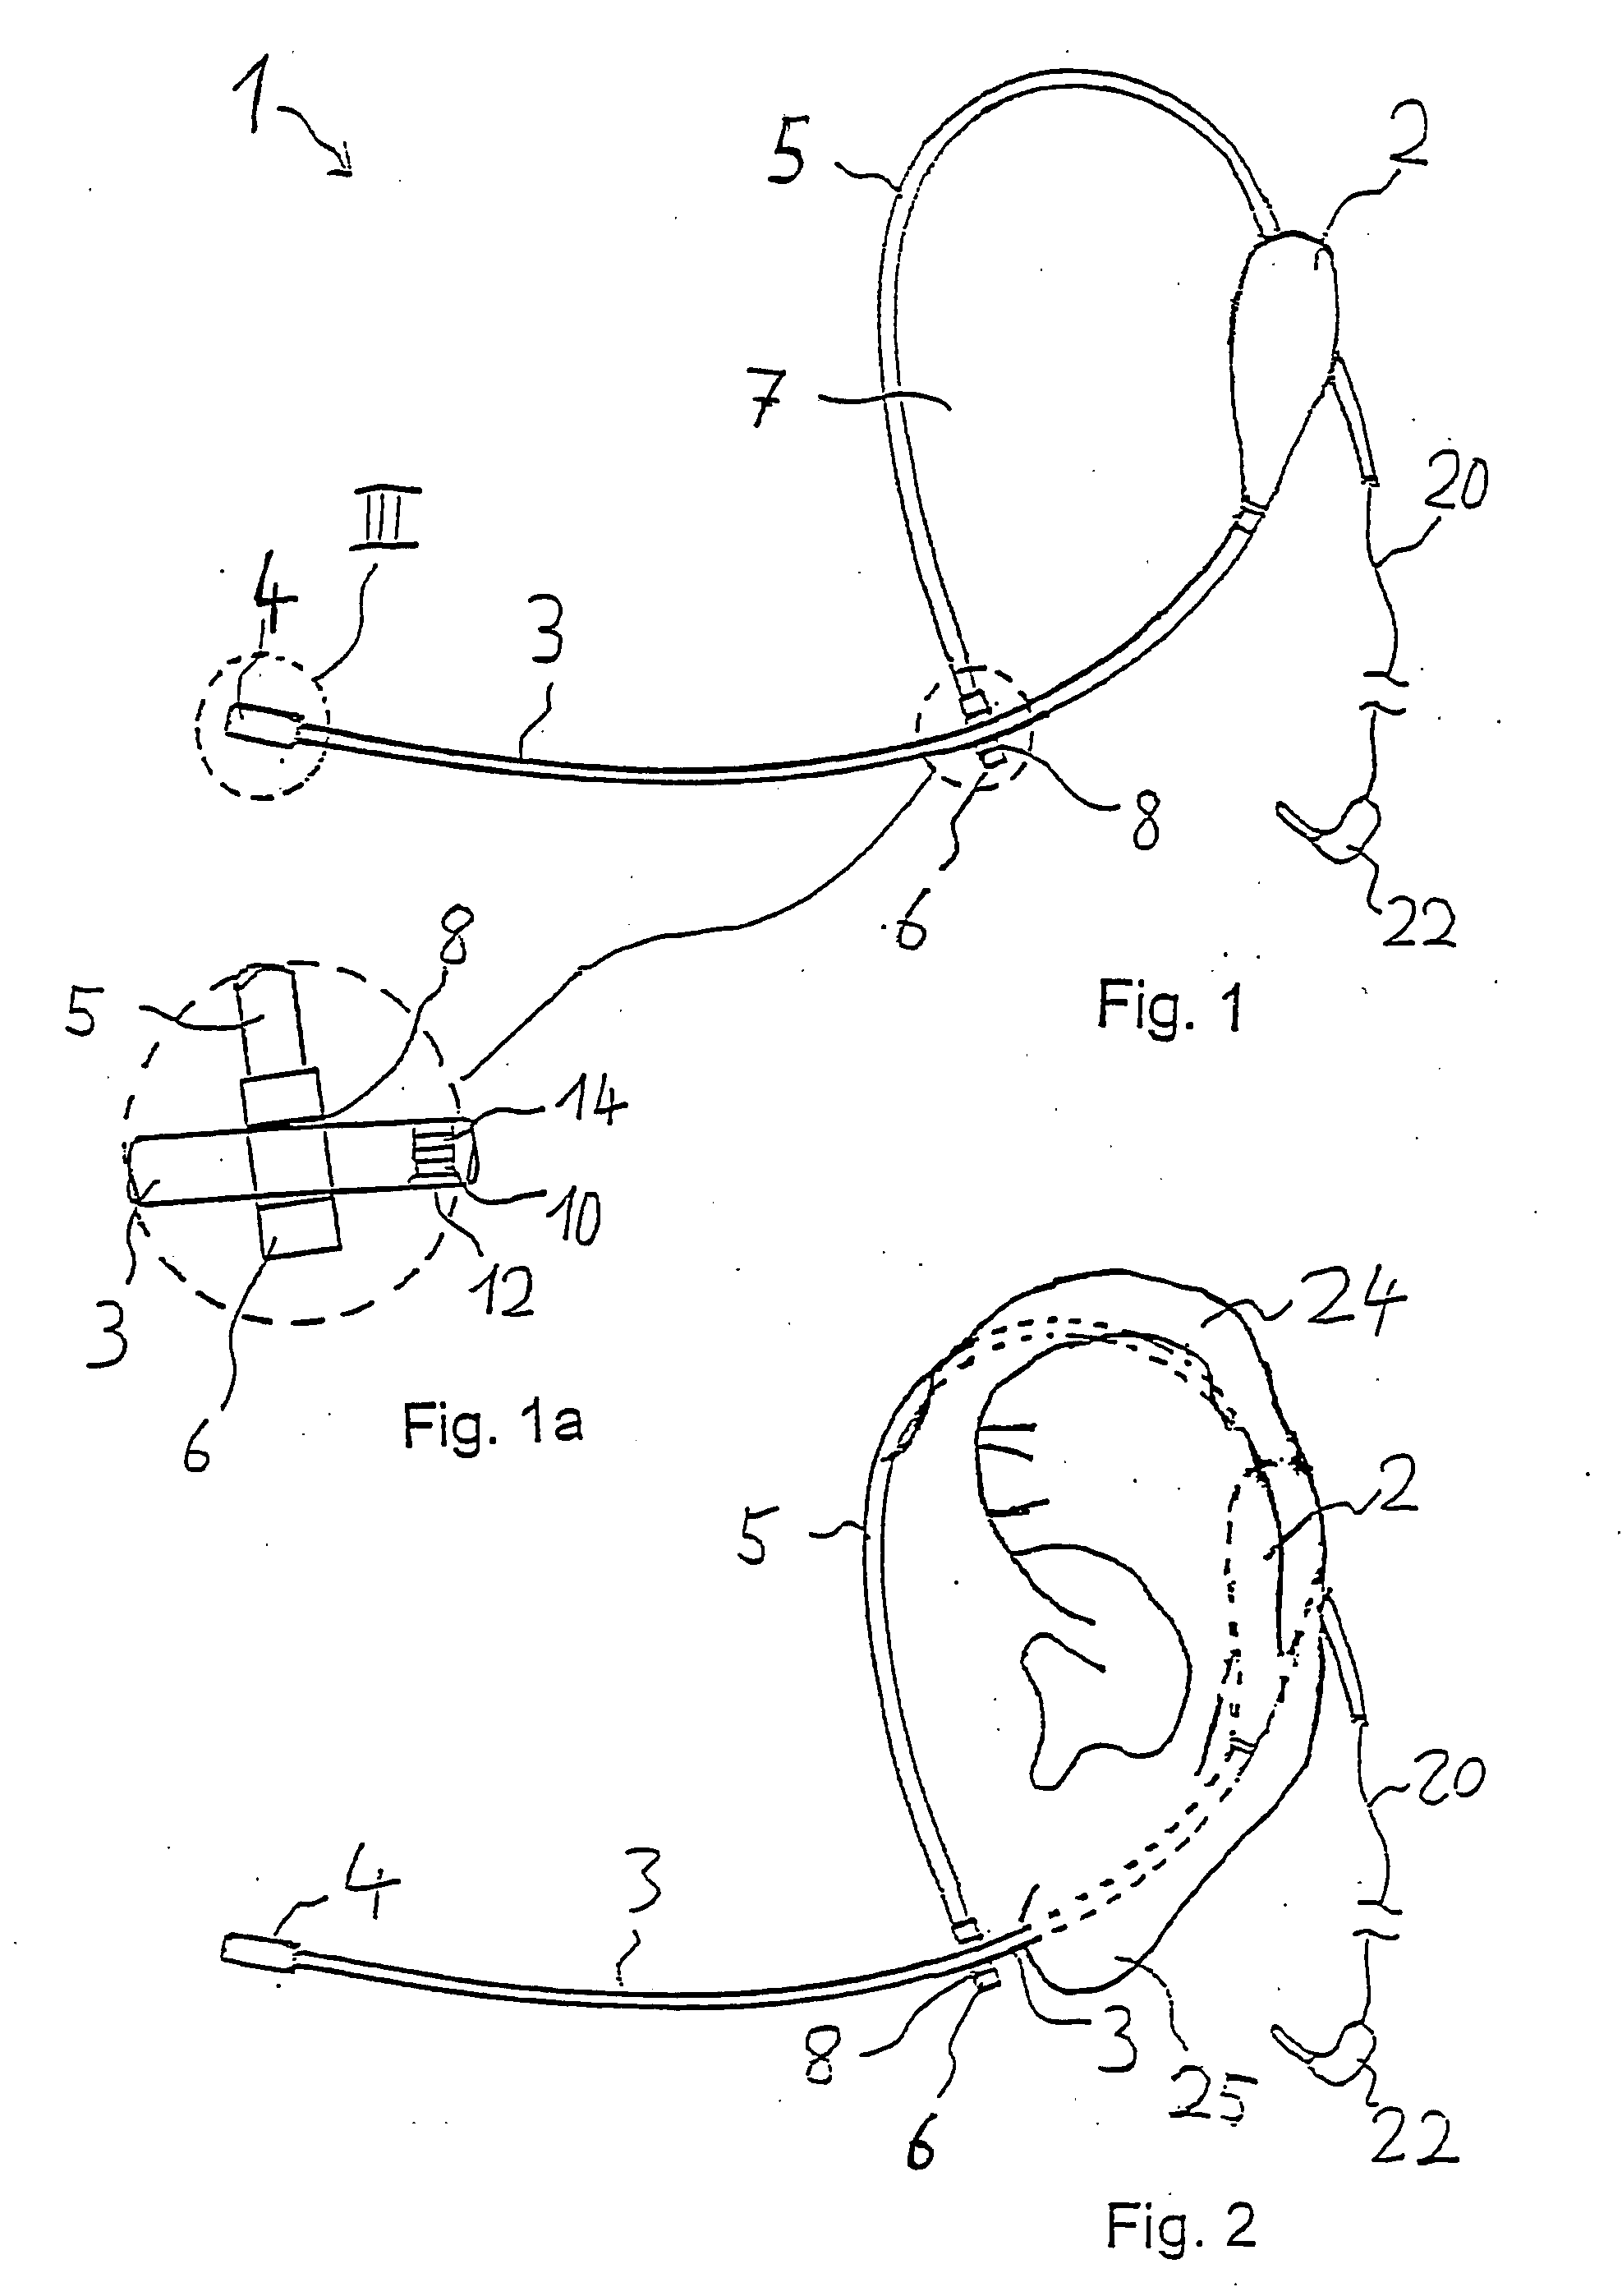 Headset for a functional device